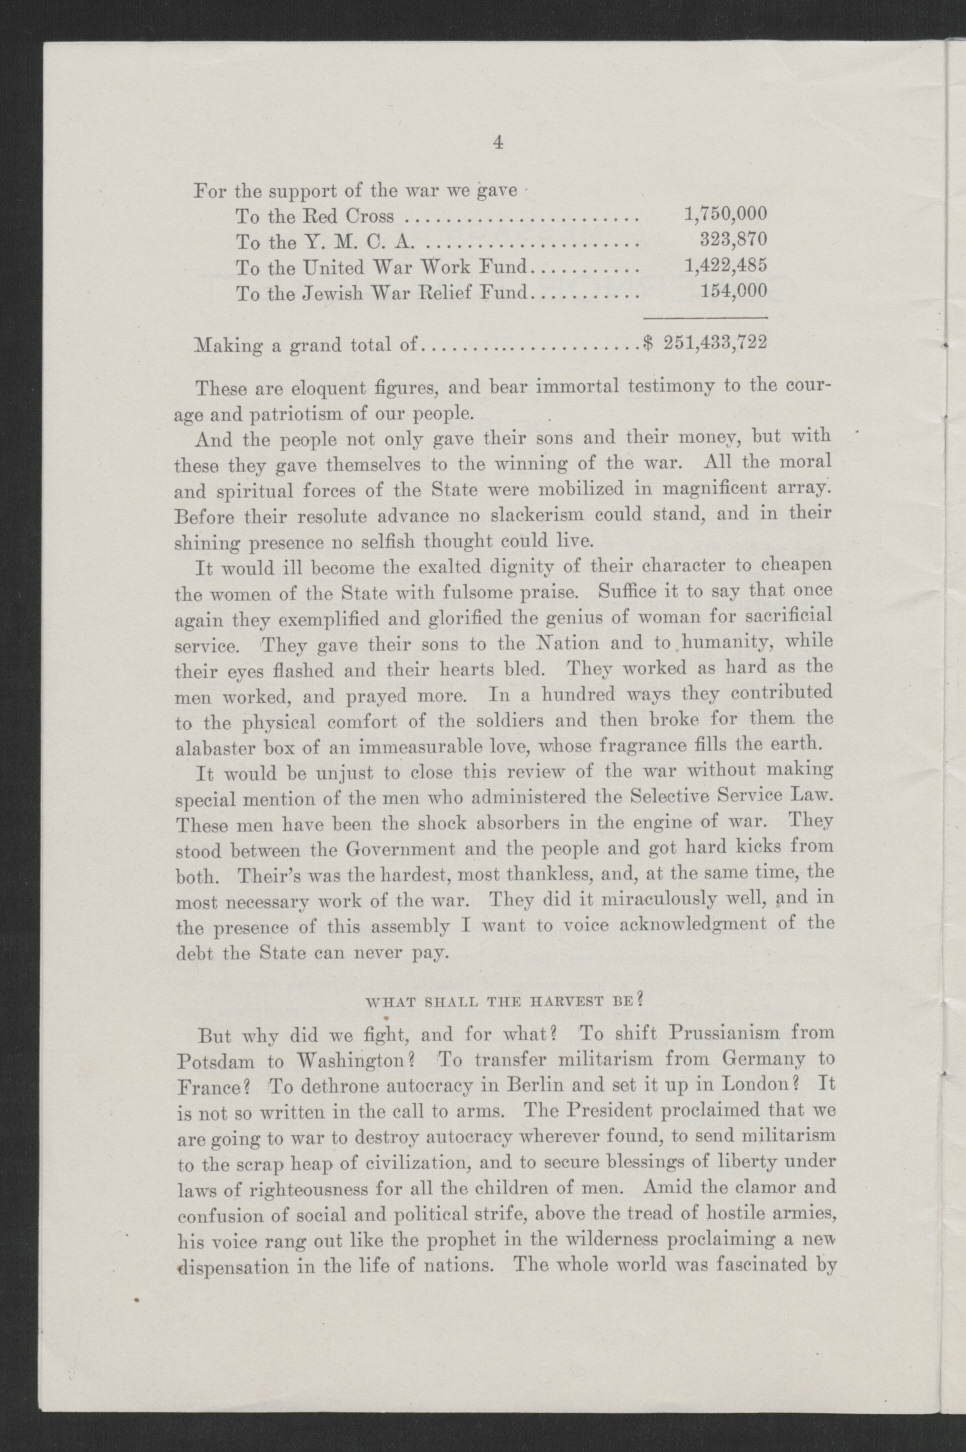 Biennial Message of Governor Thomas W. Bickett to the General Assembly, January 9, 1919, page 2